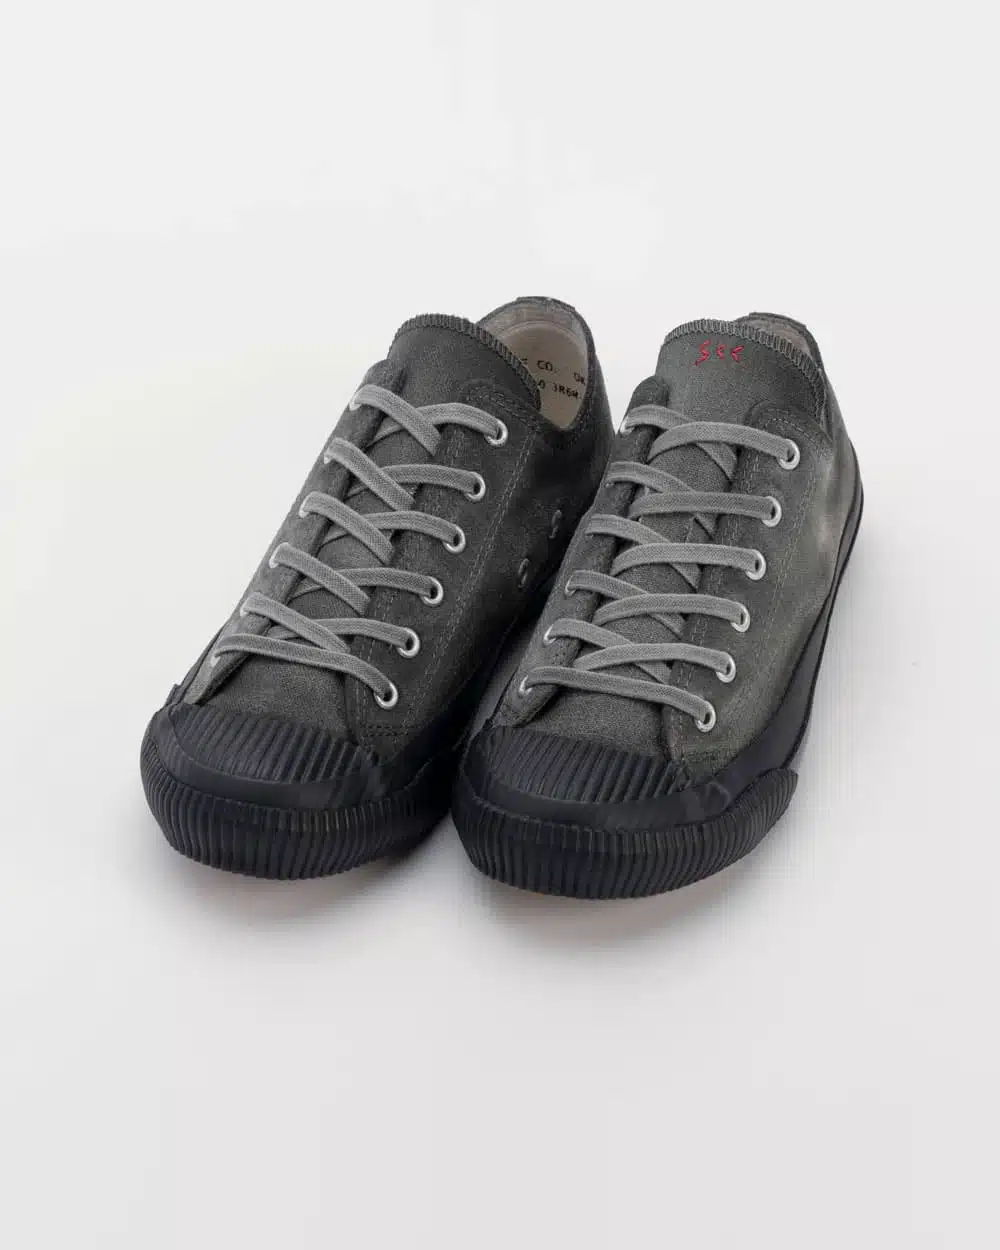 PRAS Shellcap Low Sneakers - Sumi Hand Dyed